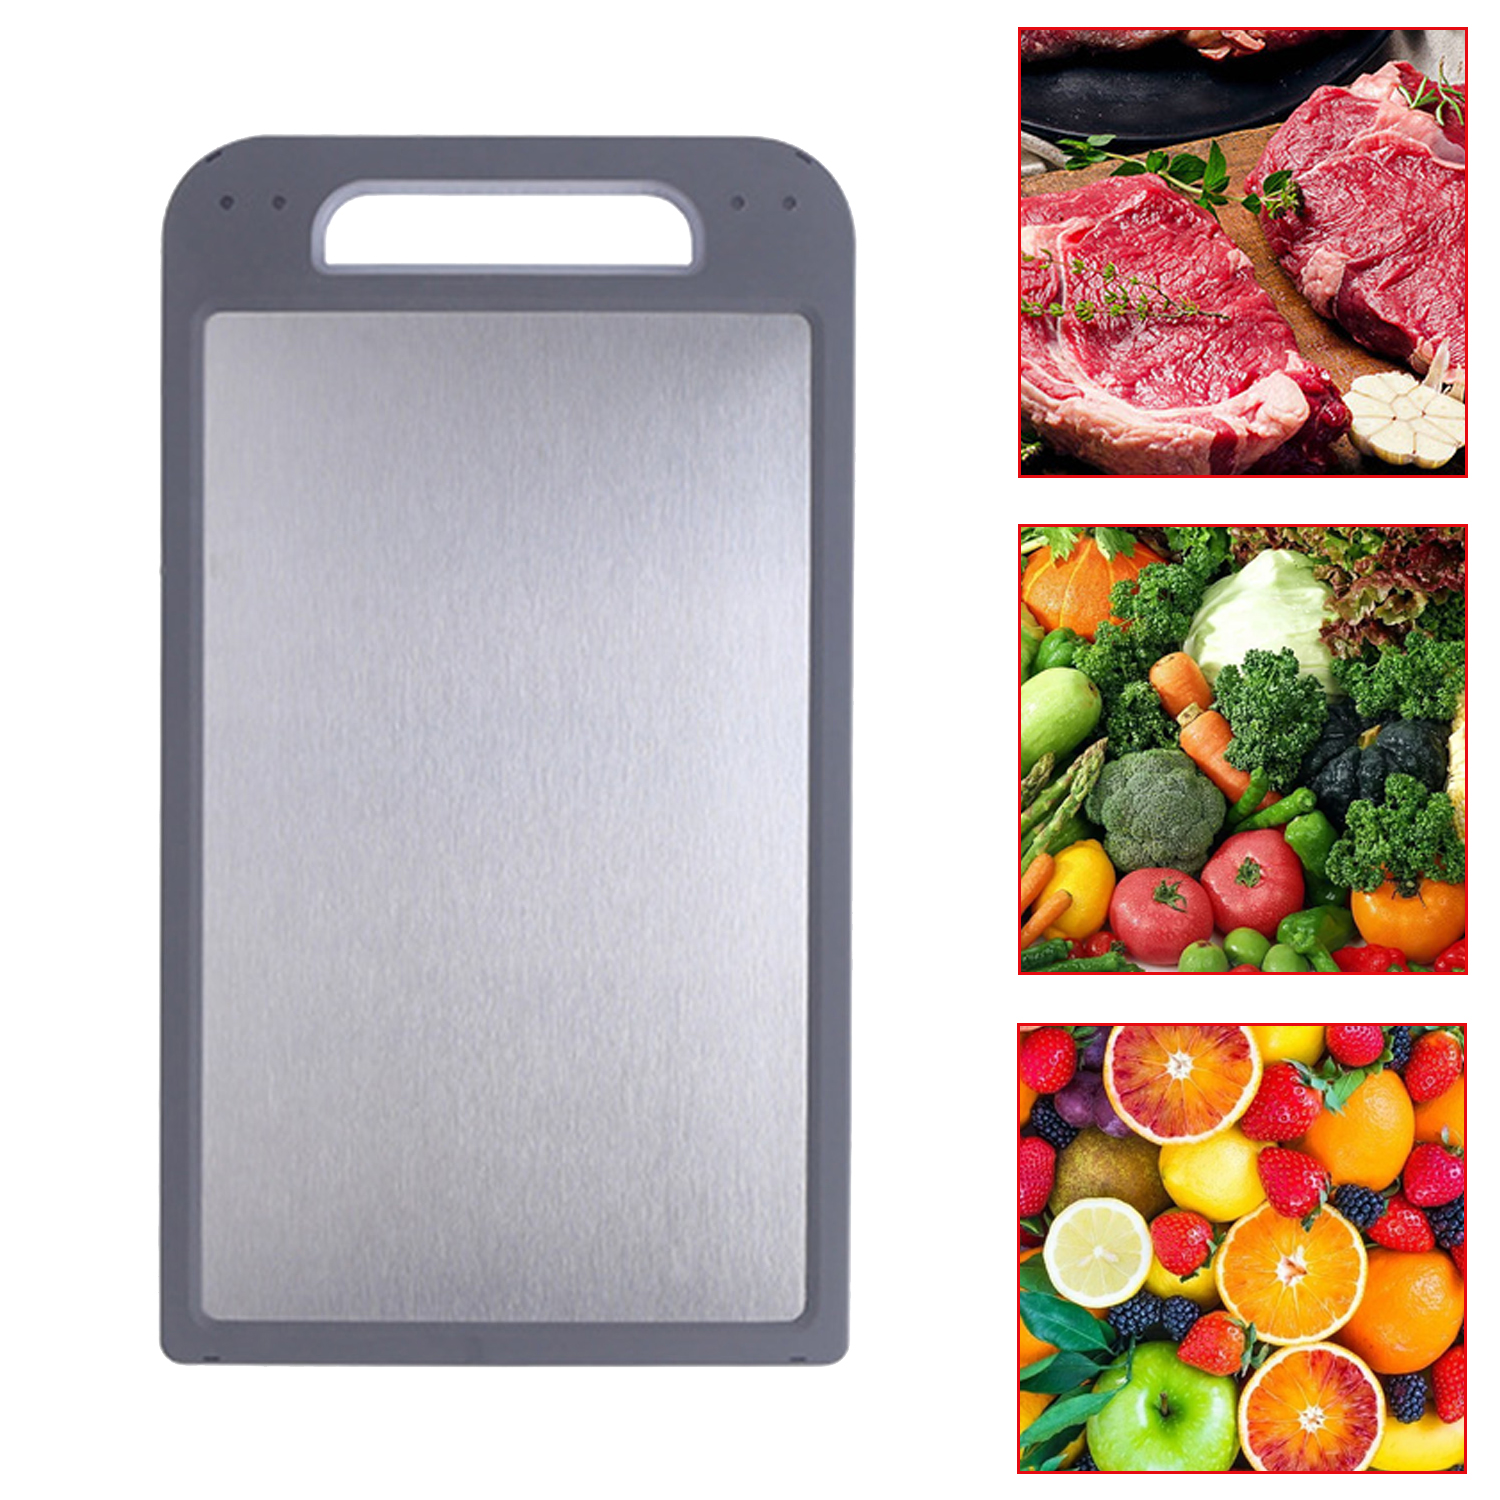 High Quality Double Sided Home Kitchen Stainless Steel And PP Cutting Chopping Board Chopping Board With Handle